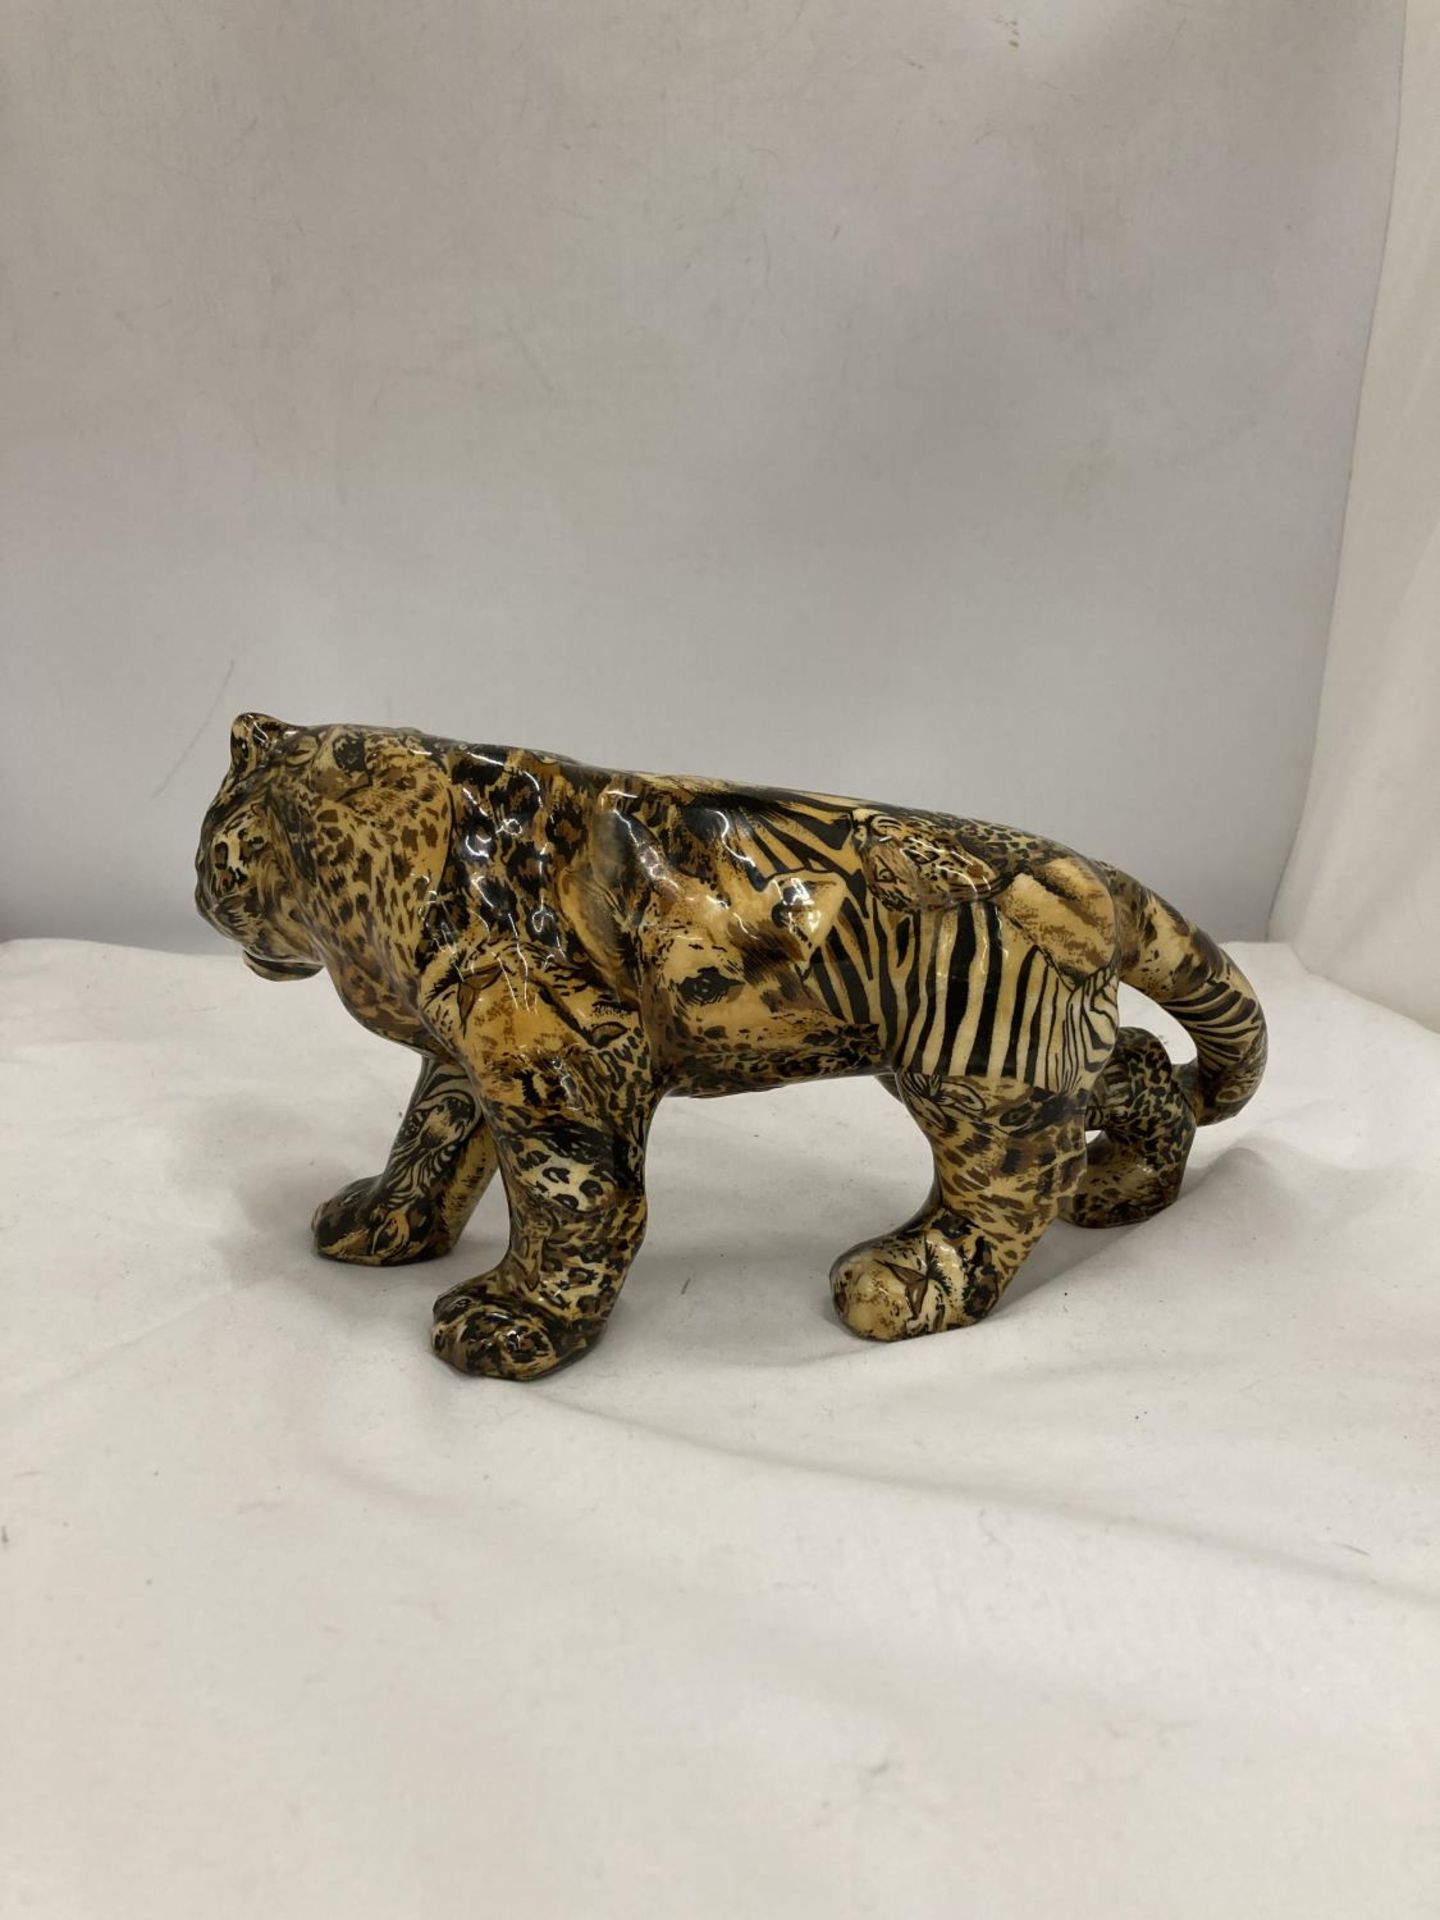 A MODEL OF A LARGE CAT WITH A PATCHWORK SAFARI DESIGN, HEIGHT 15CM, LENGTH 30CM - Image 3 of 3